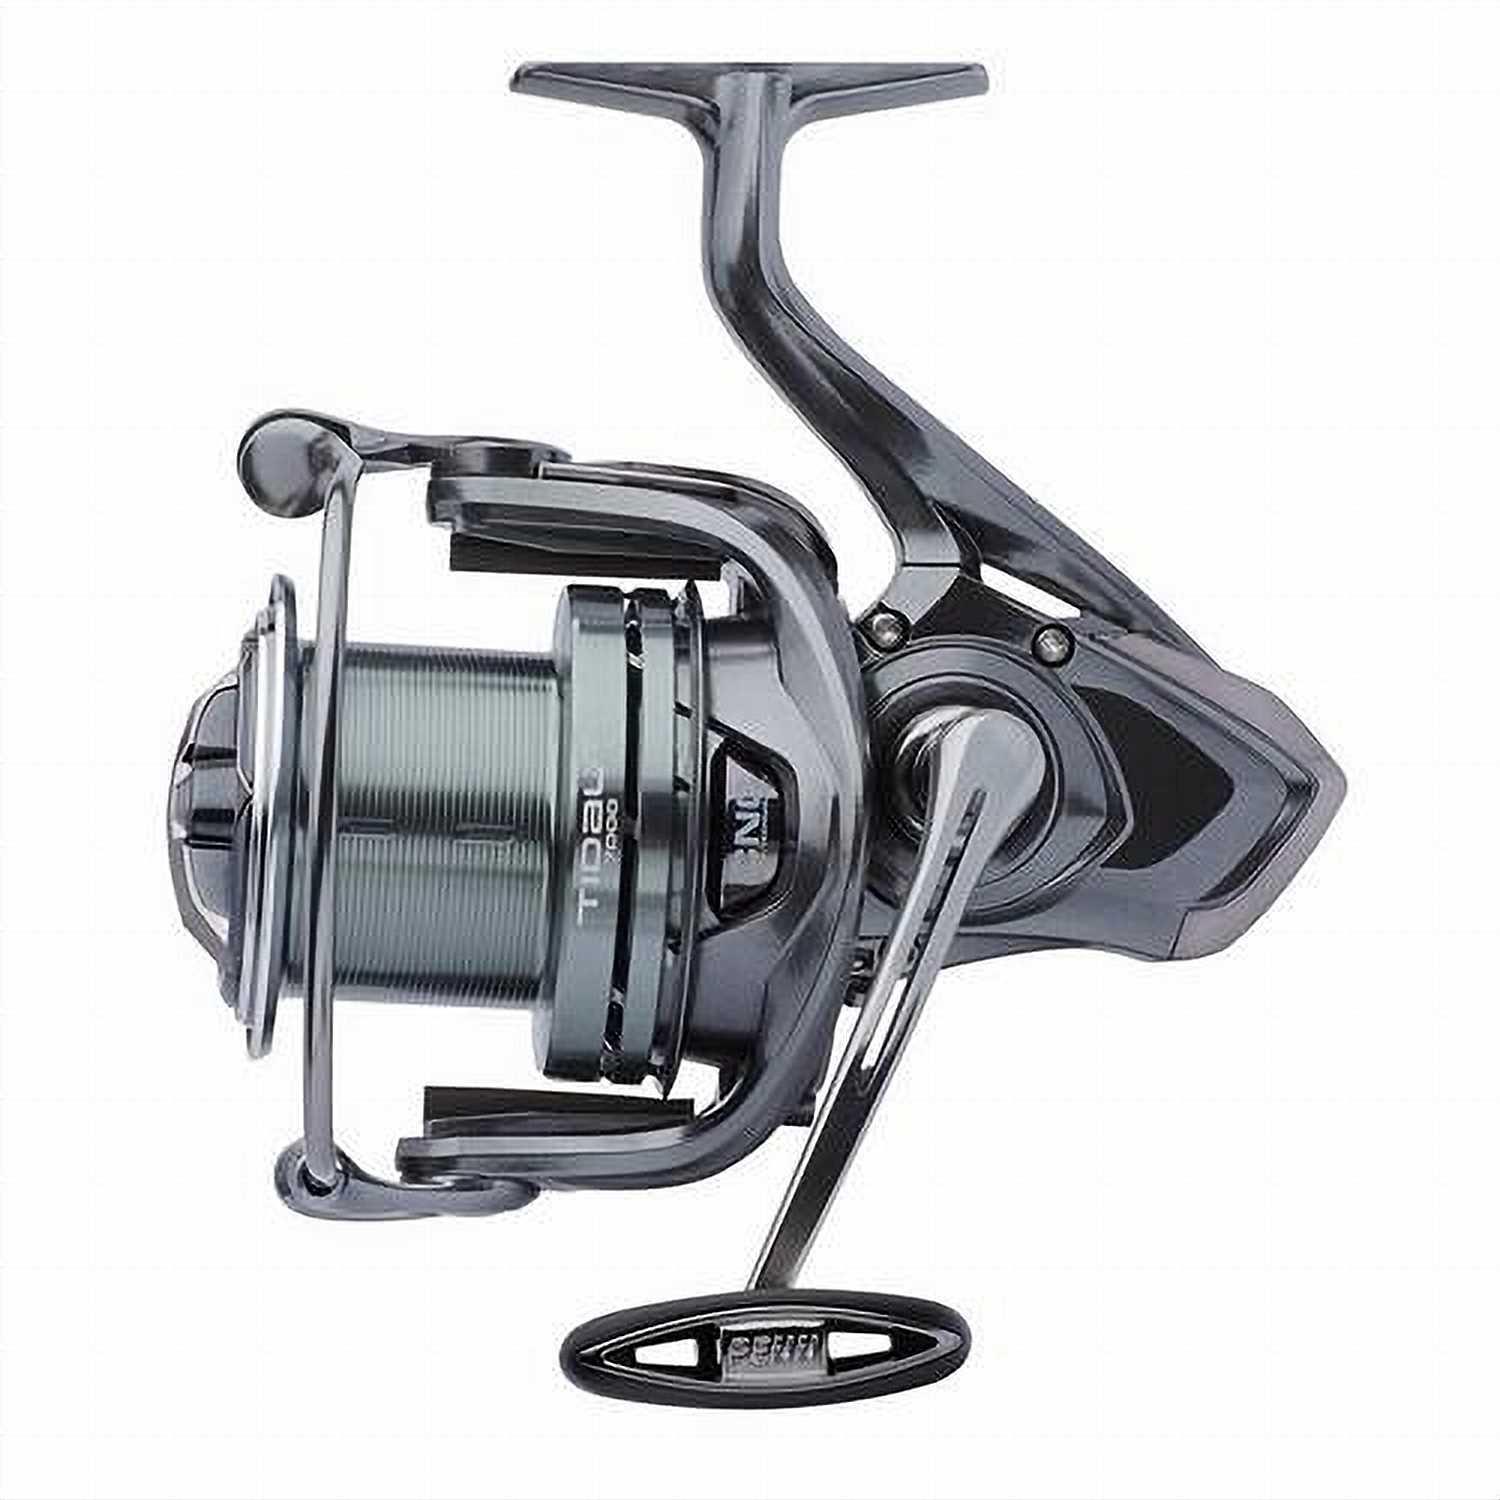 Superbly Made Reel with Aluminum Handle, Durable Waterproof Fishing Reel